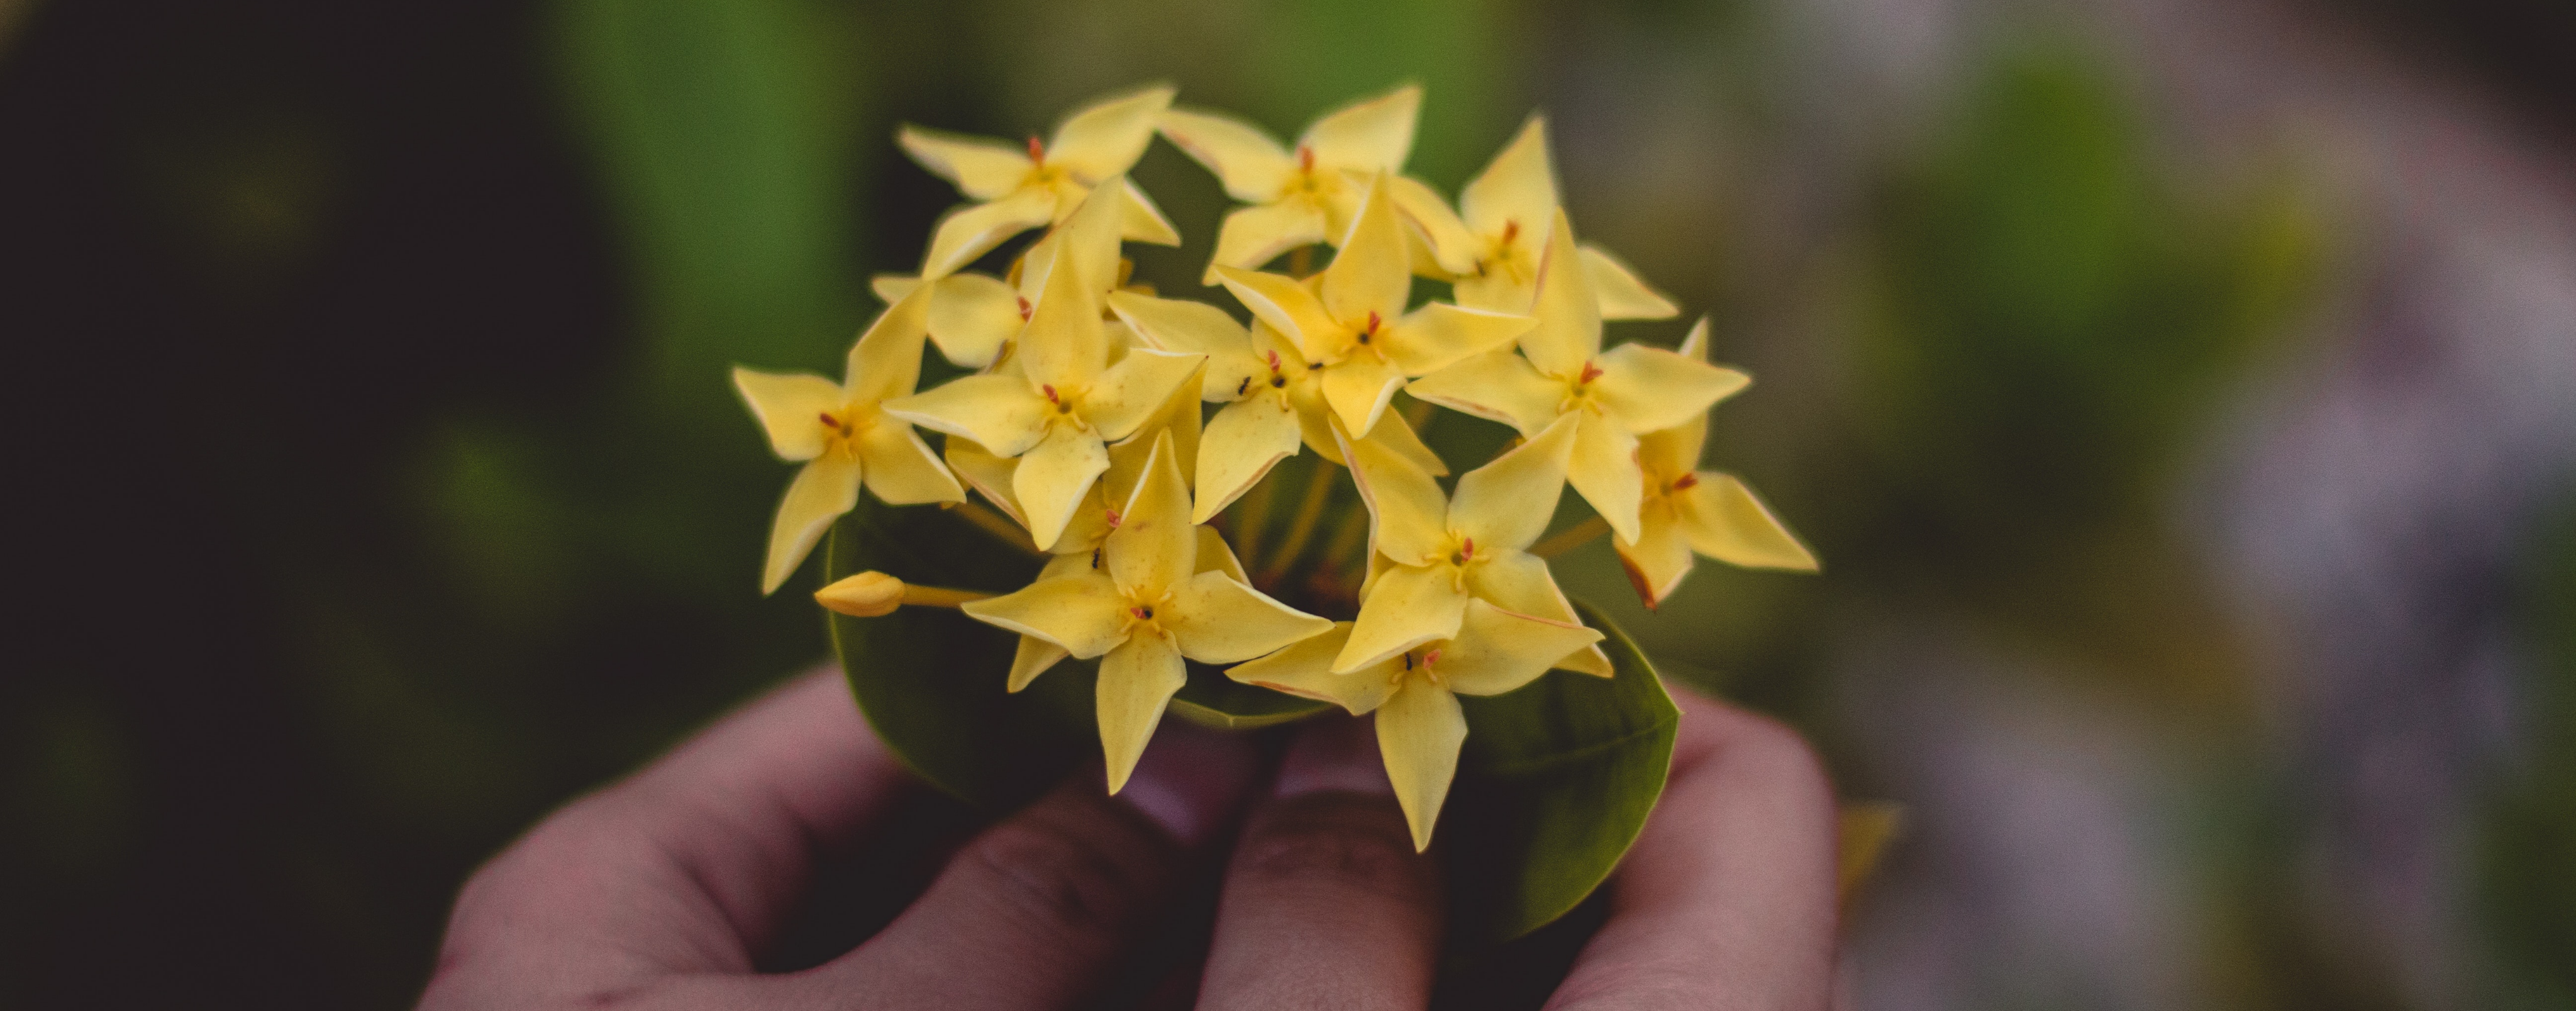 Hands holding a bundle of small yellow flowers